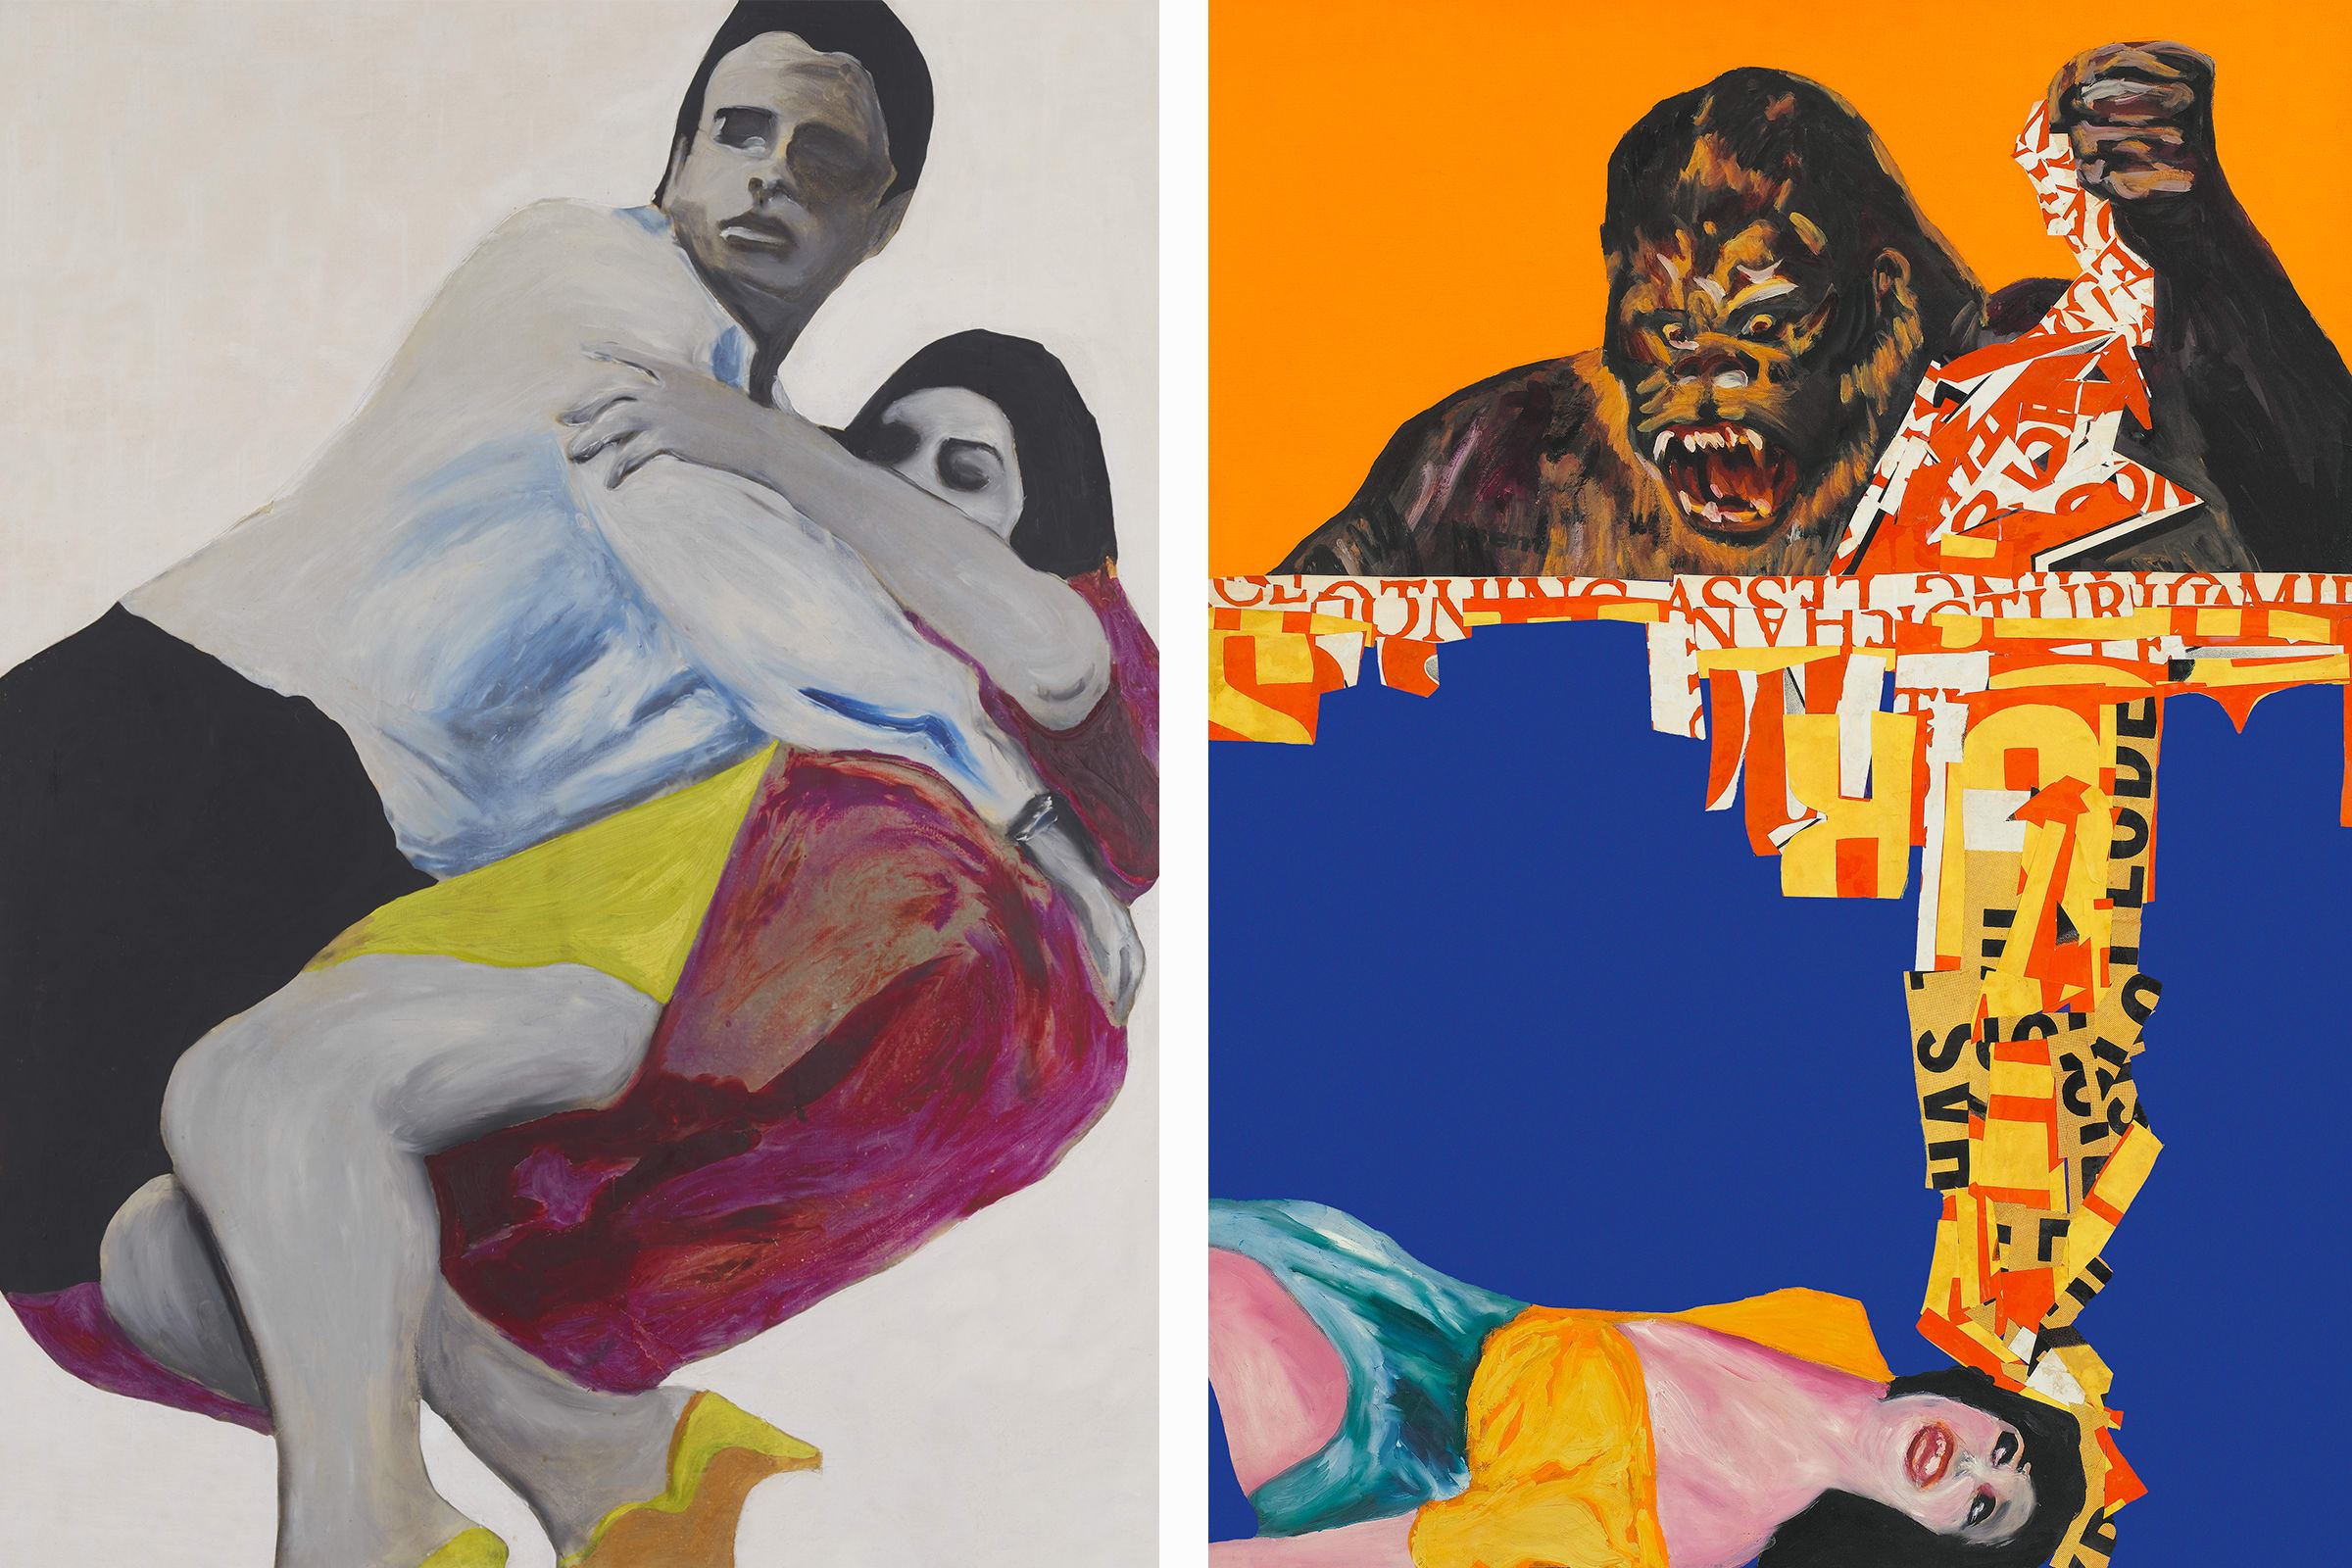 Left: Discovered, 1963. Right: The Dream, 1963. Both artworks by Rosalyn Drexler. Courtesy the artist and Garth Greenan Gallery, New York